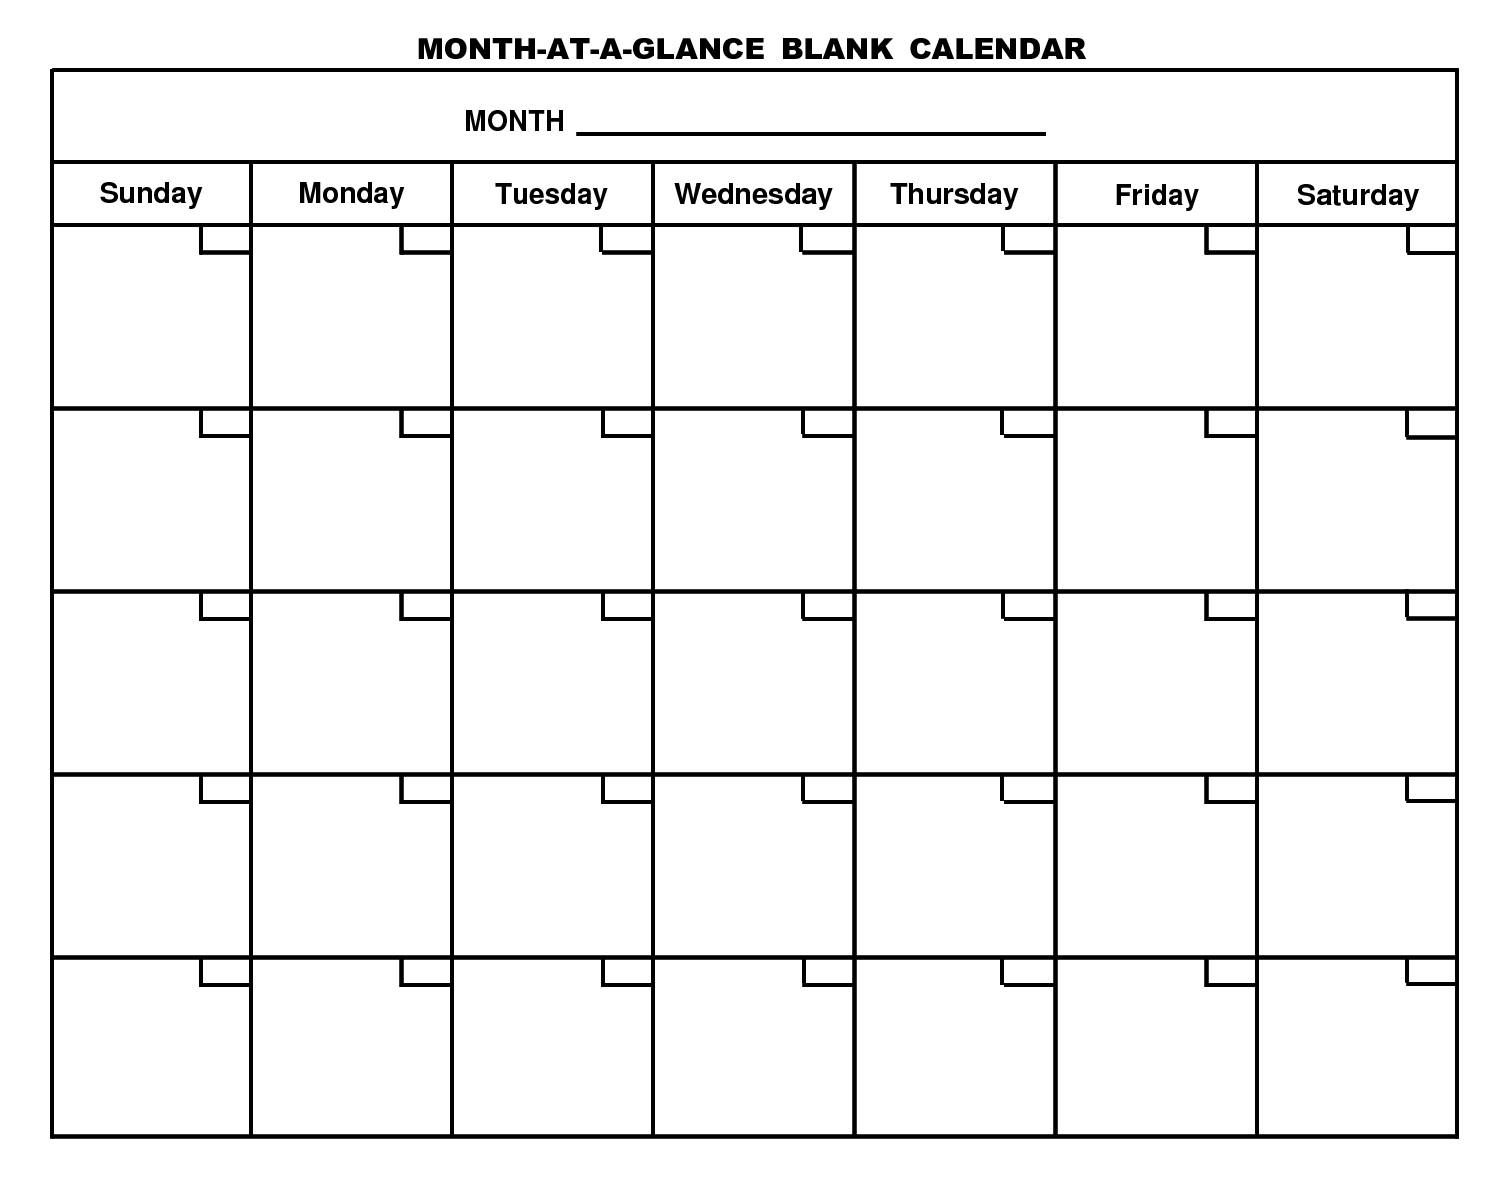 Free Printable Monthly Calendar With Large Boxes Skymaps In Month At A Glance Blank Calendar Template